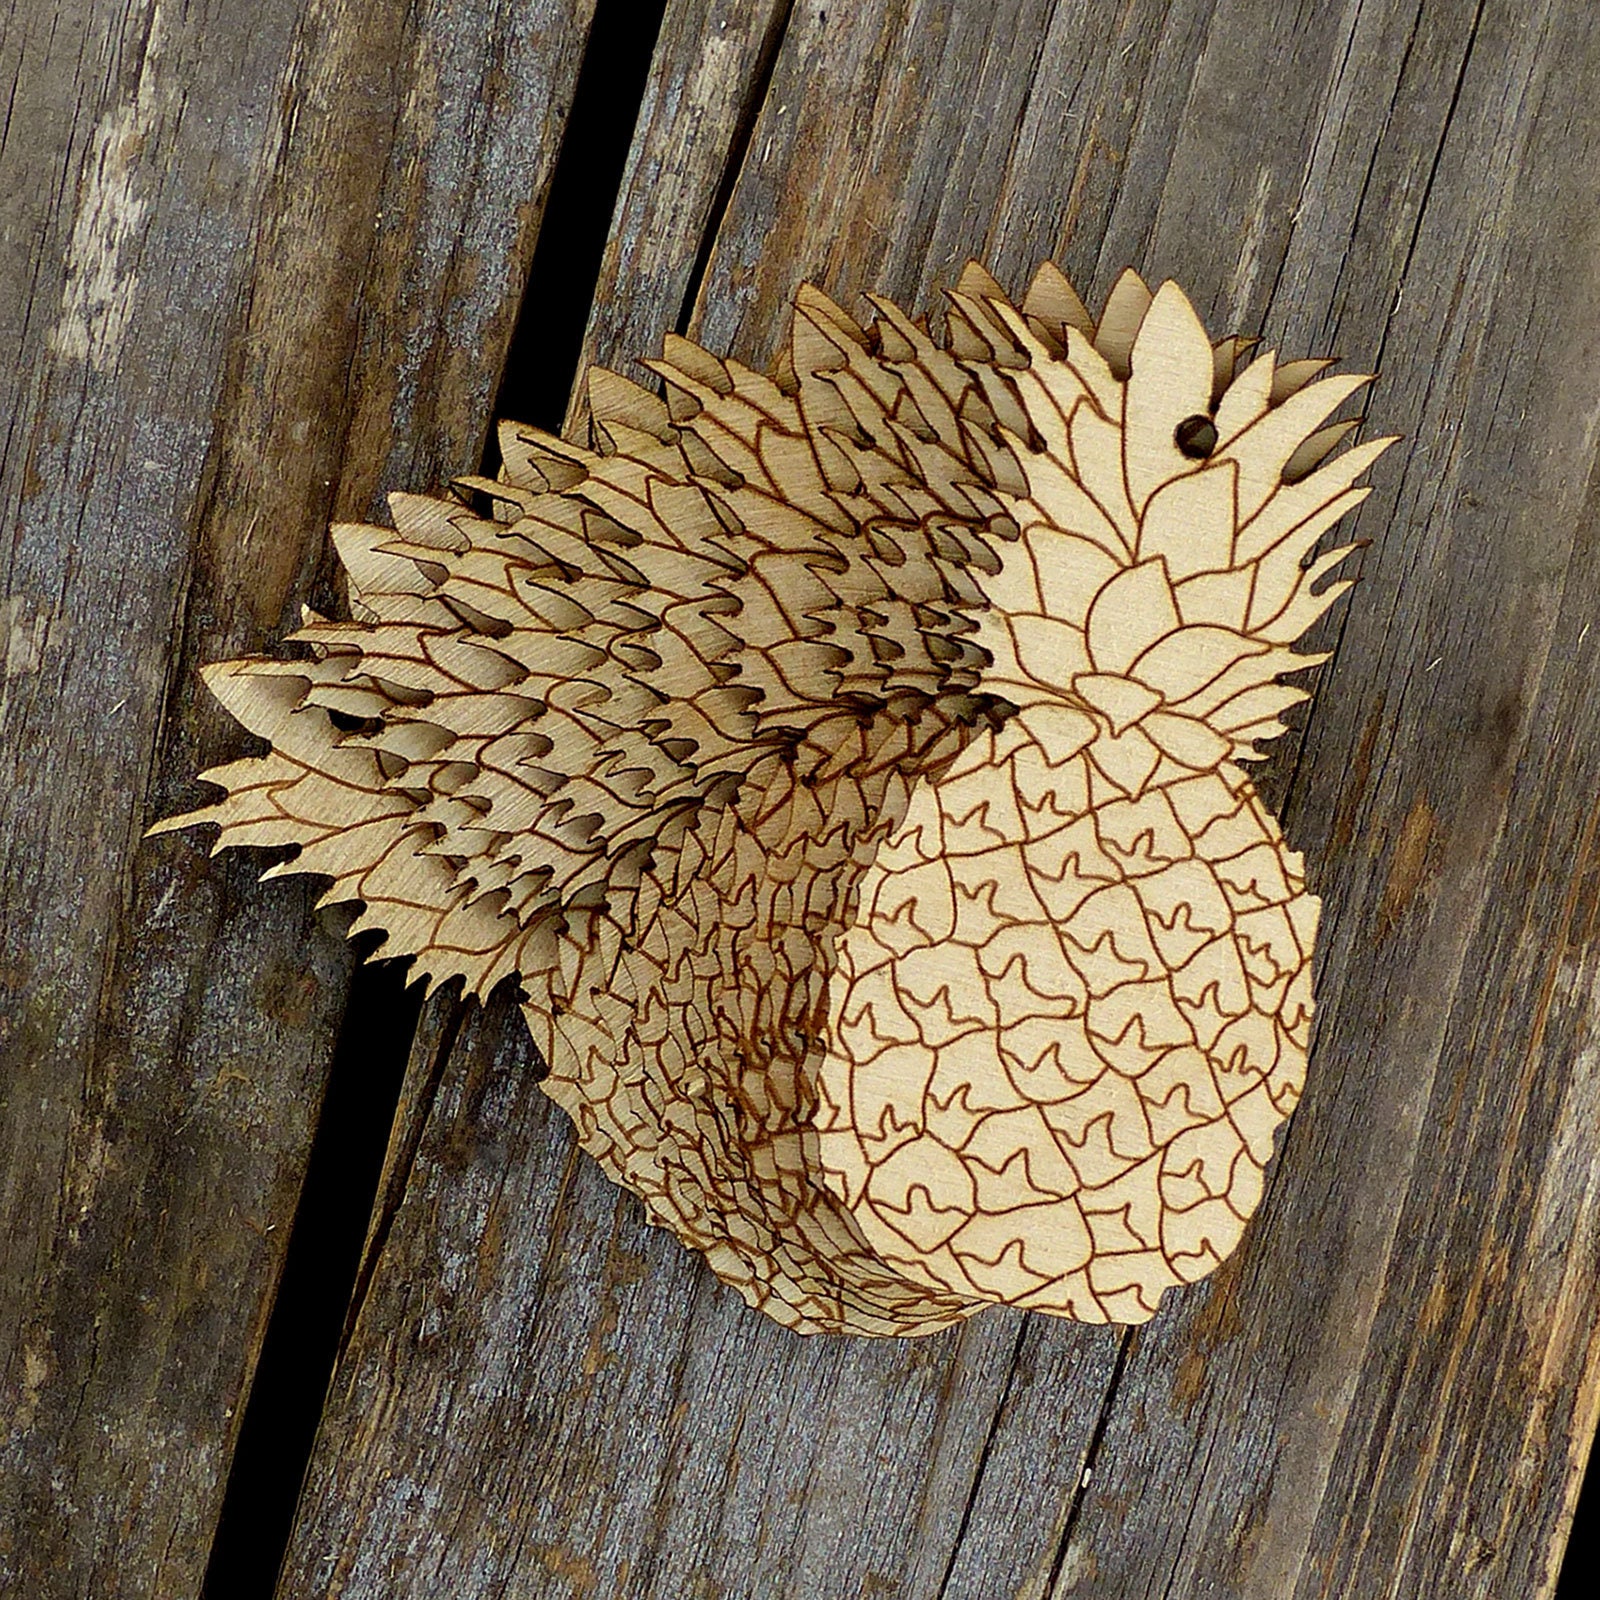 Fruit Shape 10x Ply Singapore Wooden Pineapple Etsy Craft Plant - Vine Whole 3mm Tropical Food